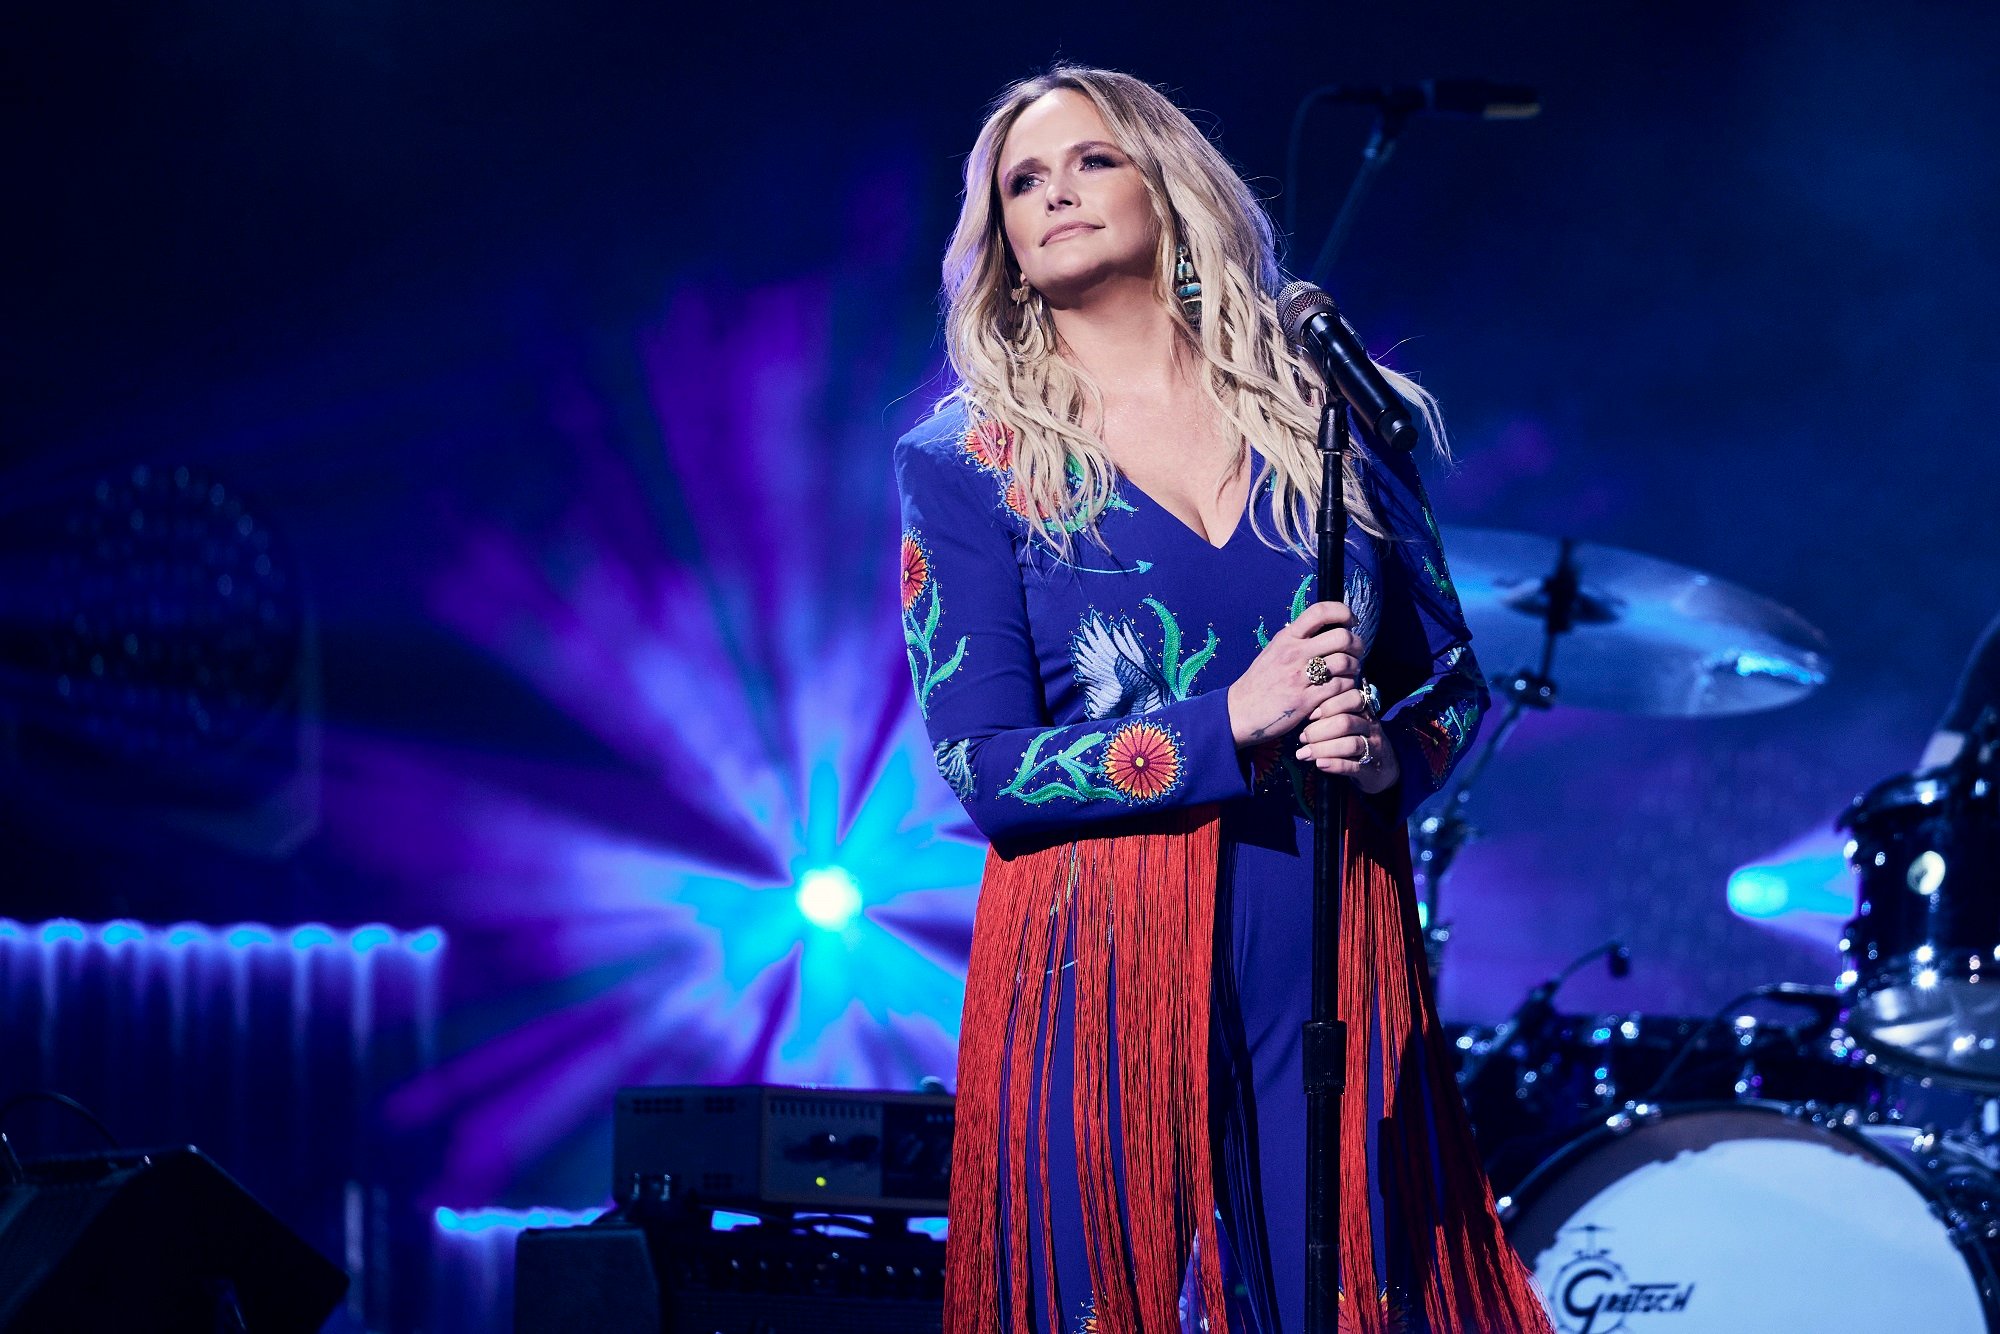 Miranda Lambert holds a microphone stand while wearing a blue-and-red outfit